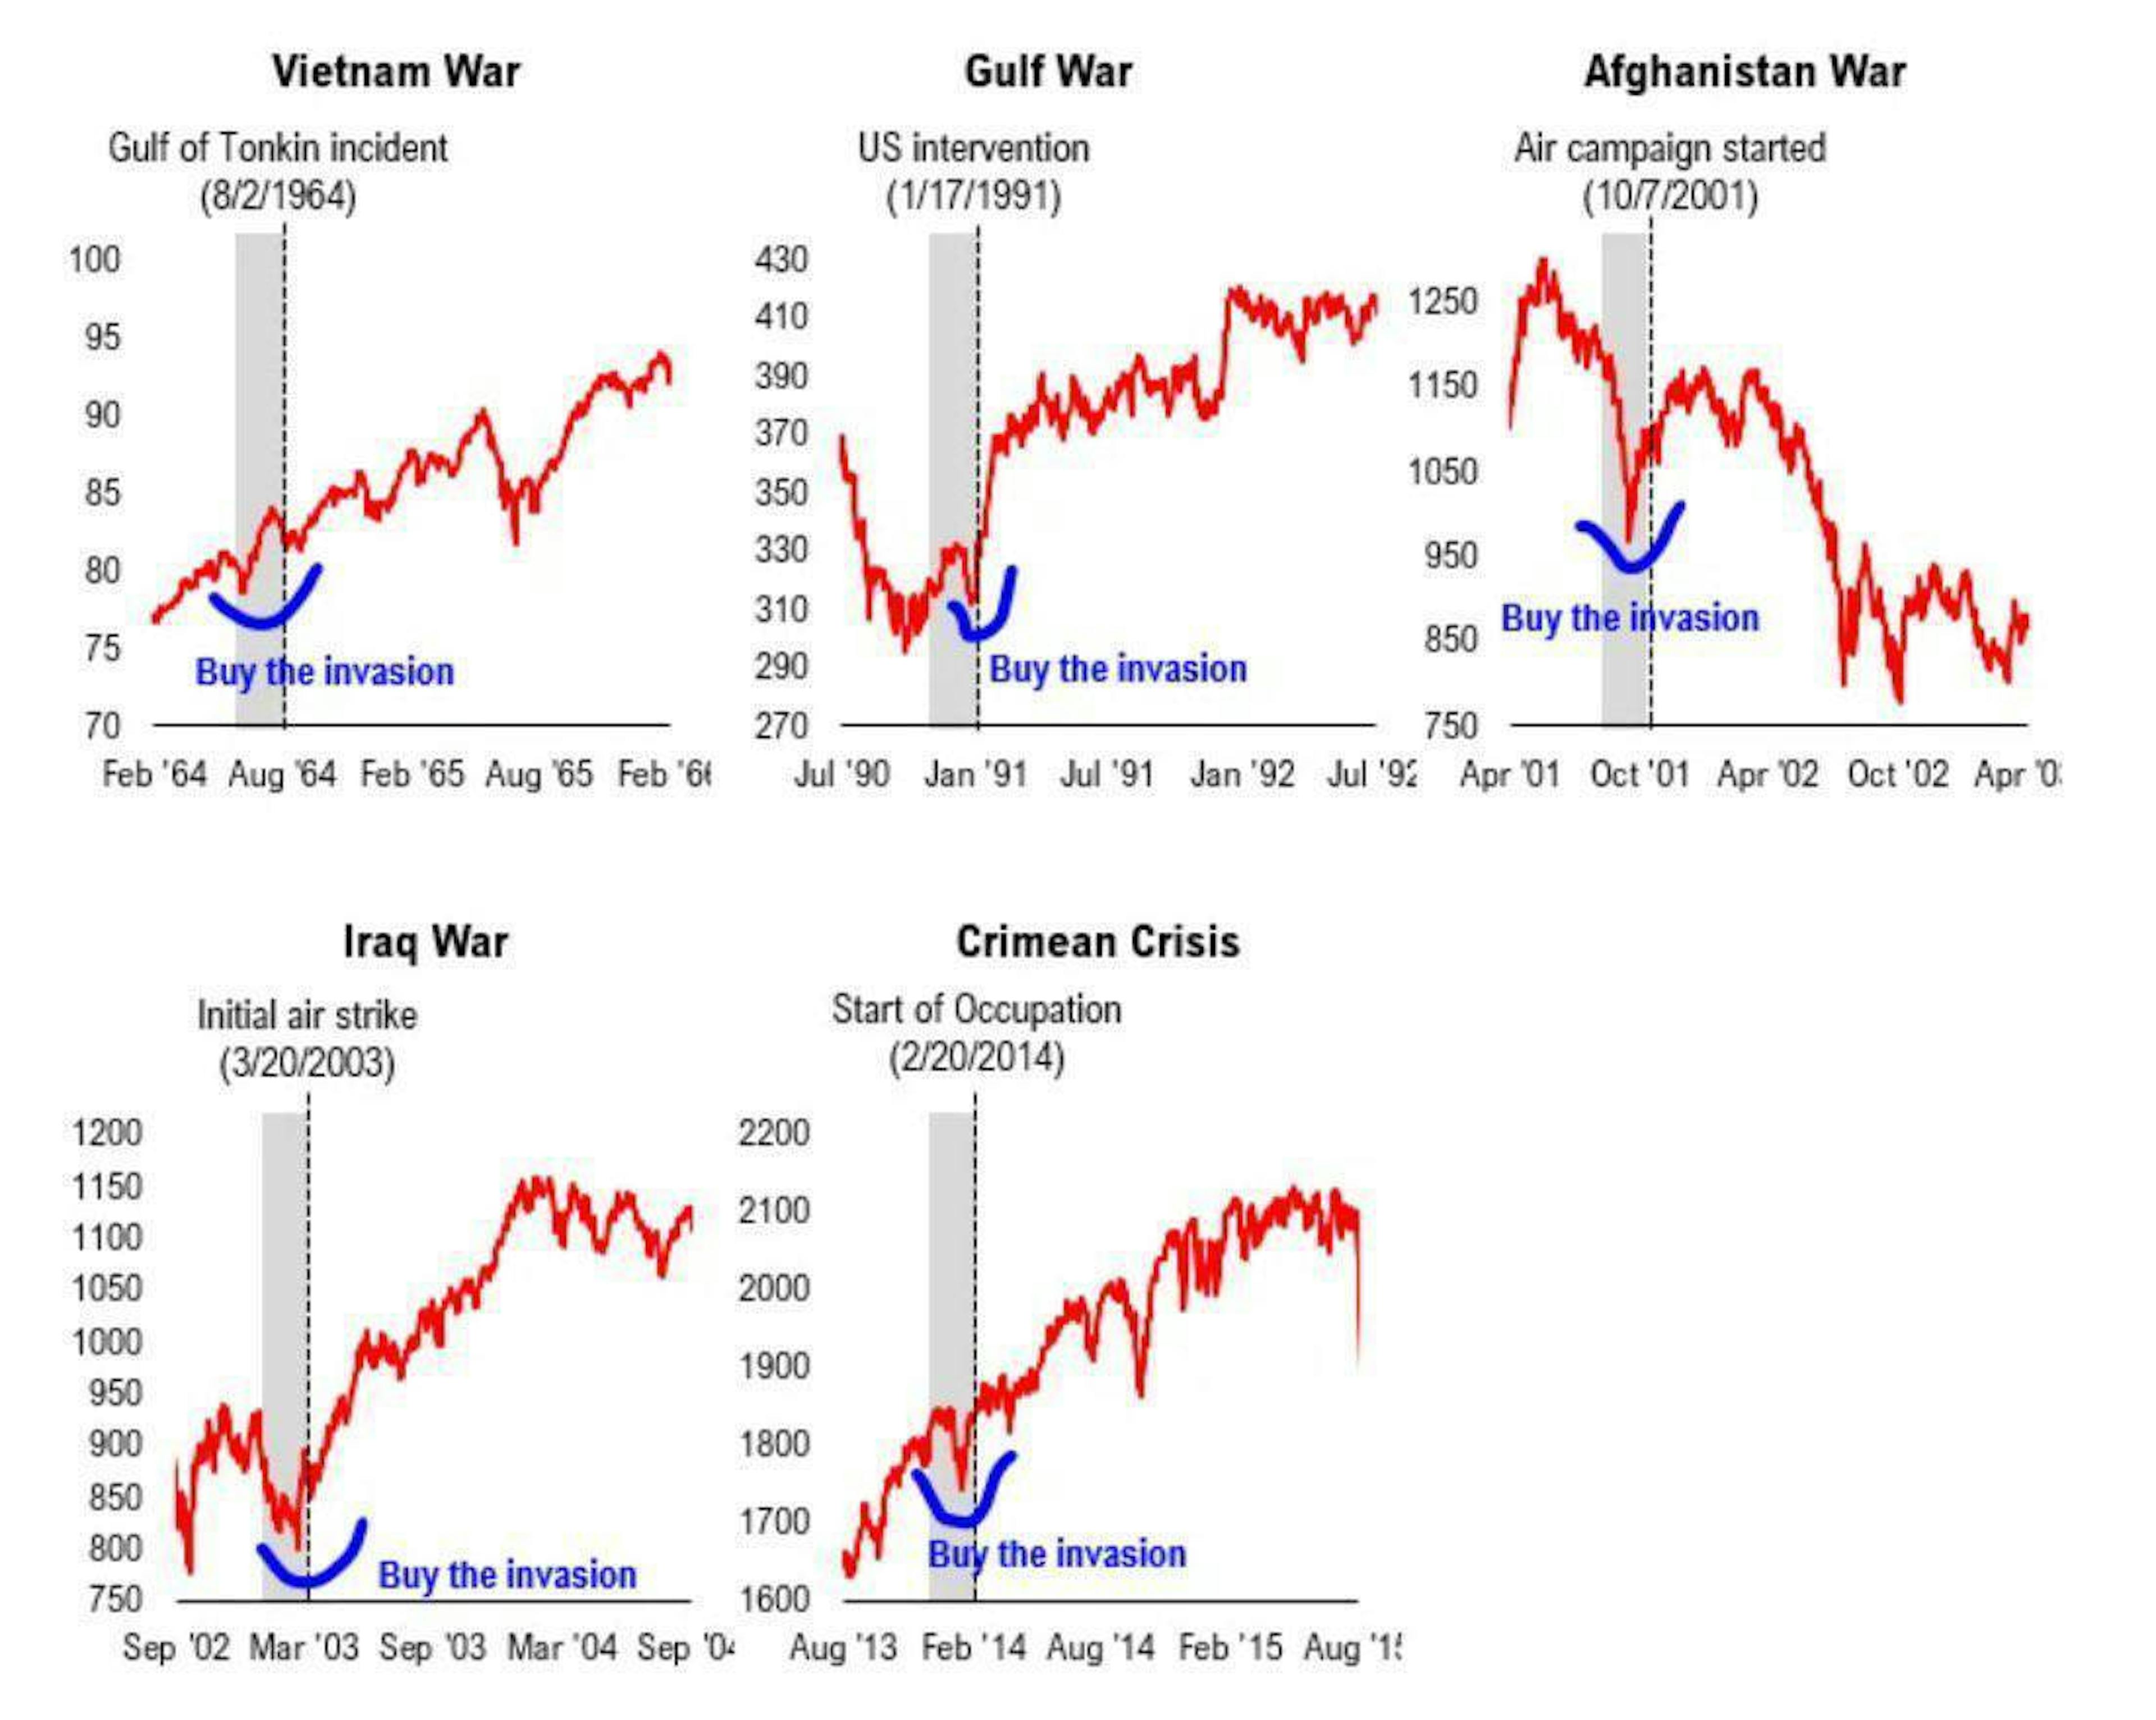 Wars in the Middle East generally don't matter for risk assets in the medium to long term